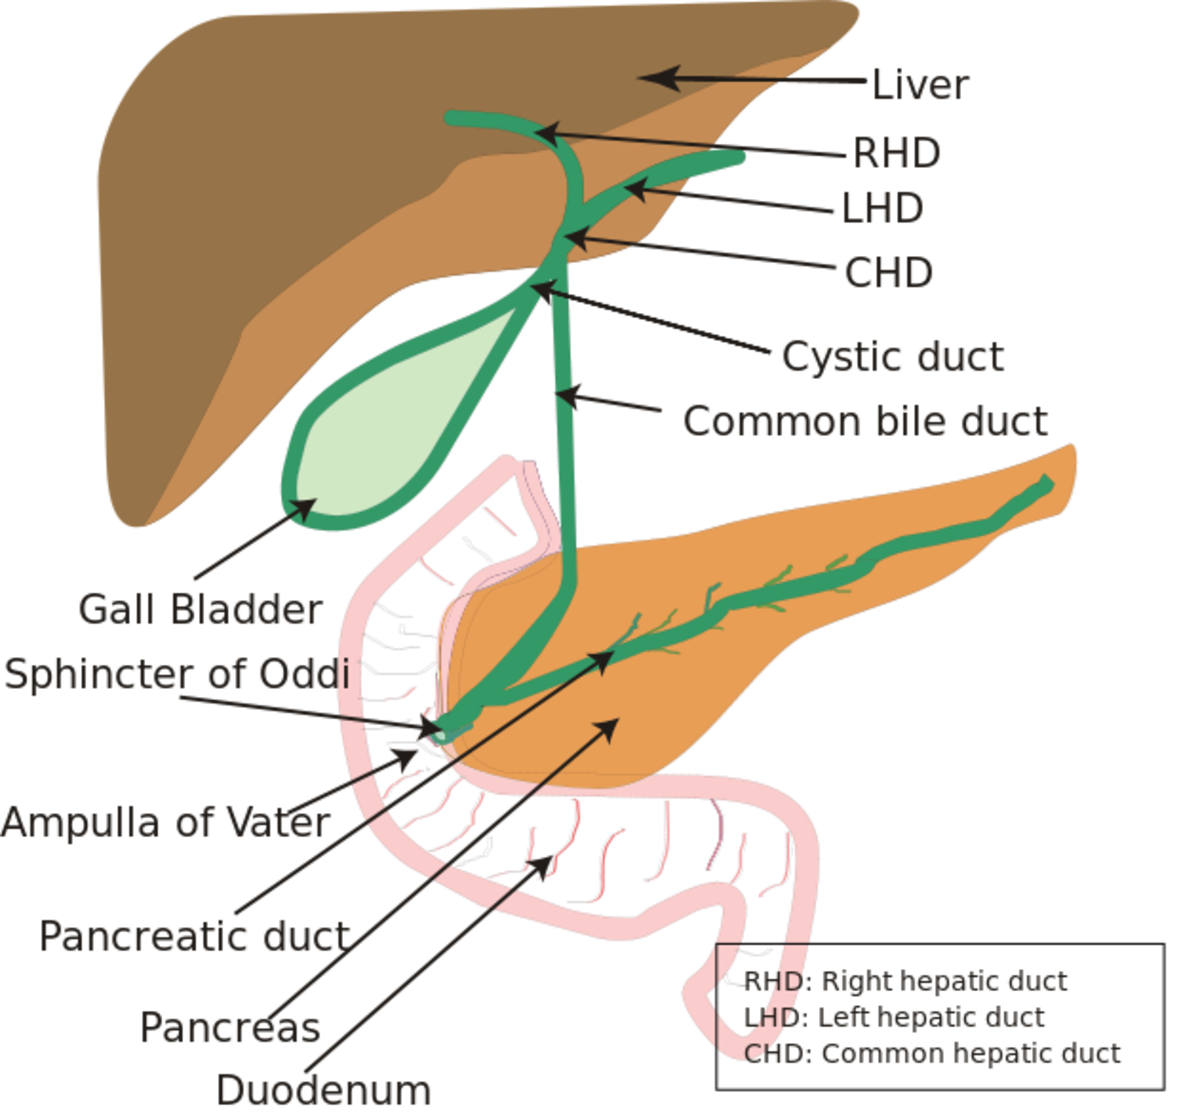 Location of the gallbladder (in green) and bile ducts